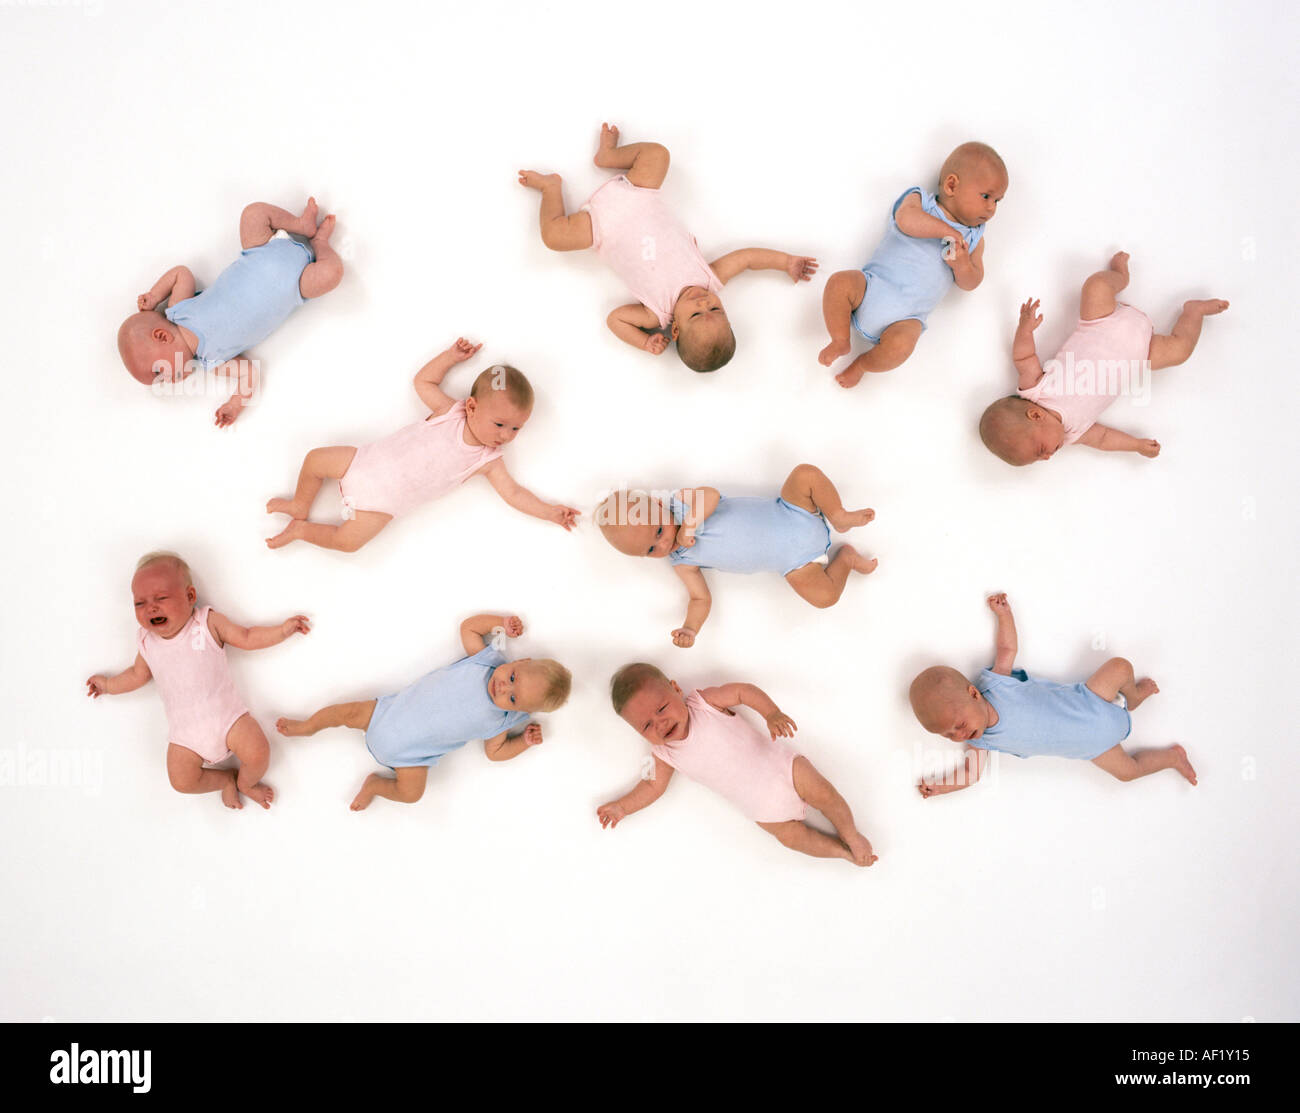 Ten babies in pink and blue Stock Photo